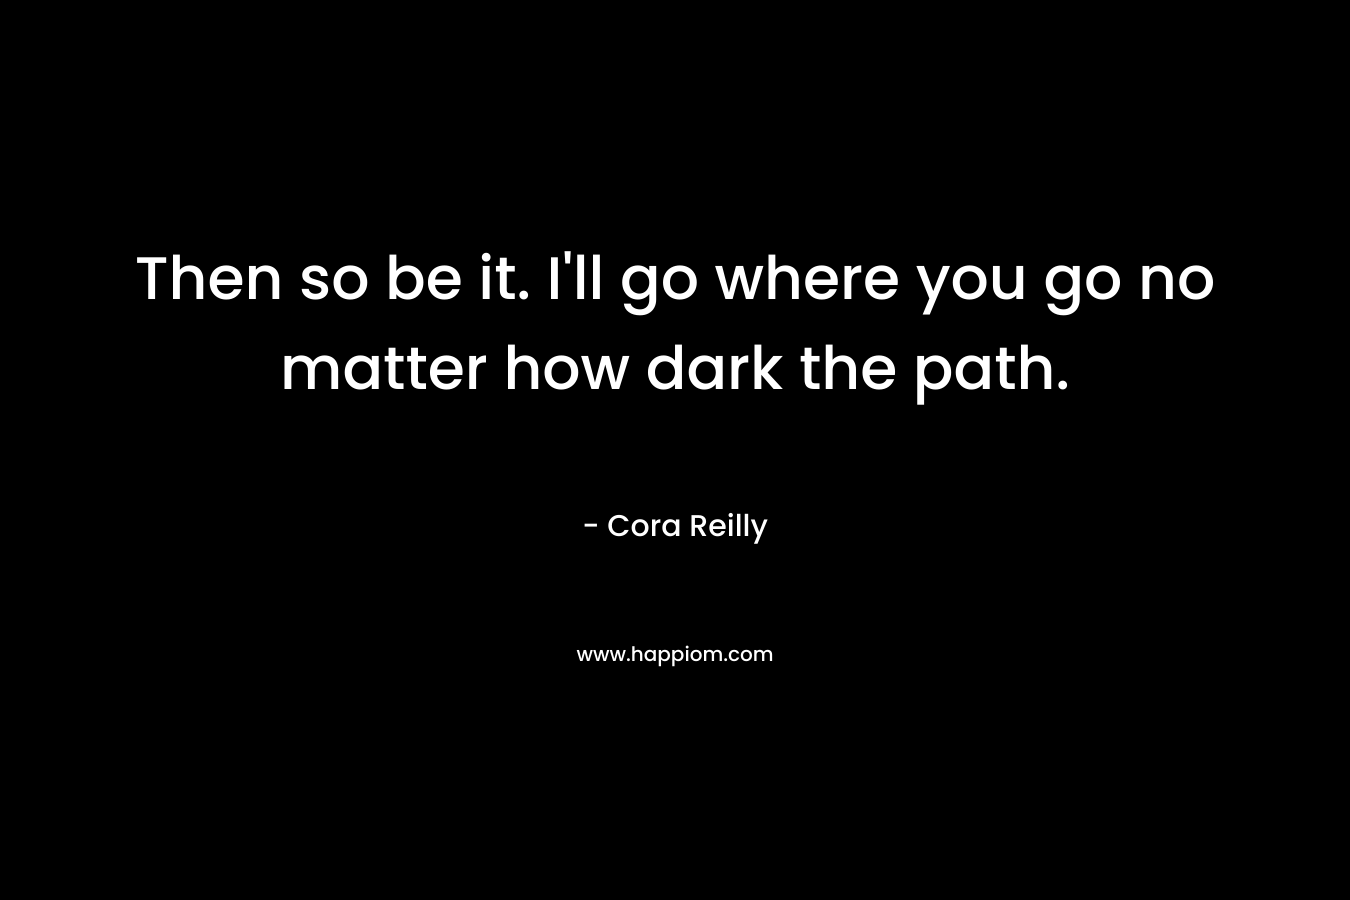 Then so be it. I’ll go where you go no matter how dark the path. – Cora Reilly